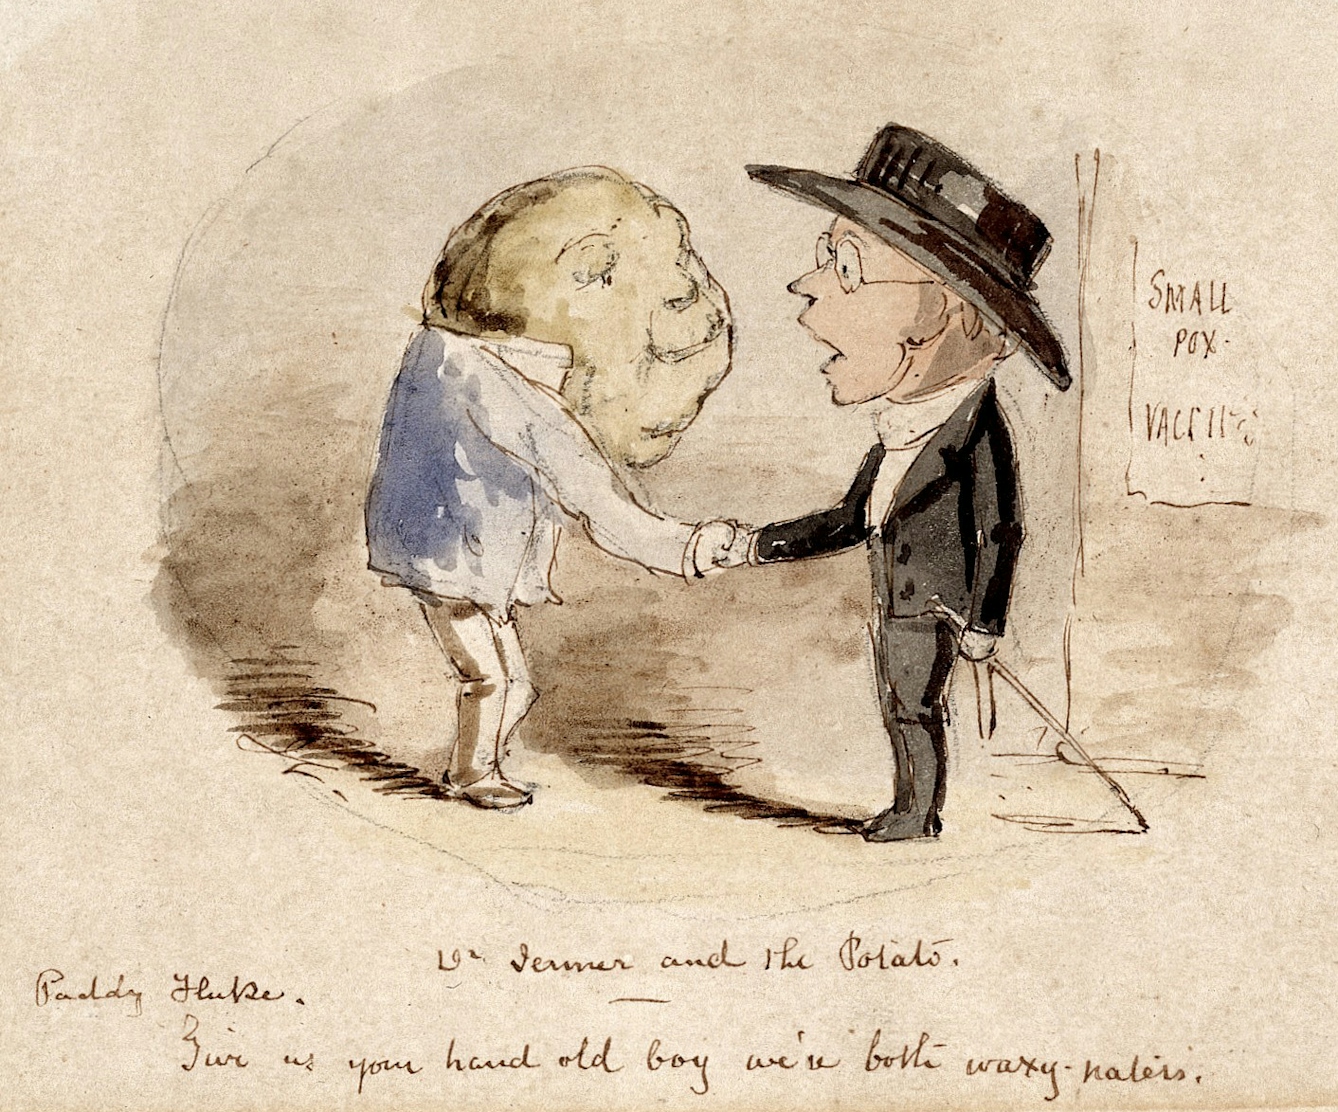 A potato shaking hands with Edward Jenner and claiming him as a fellow vaccinator, John Leech, 1800s.